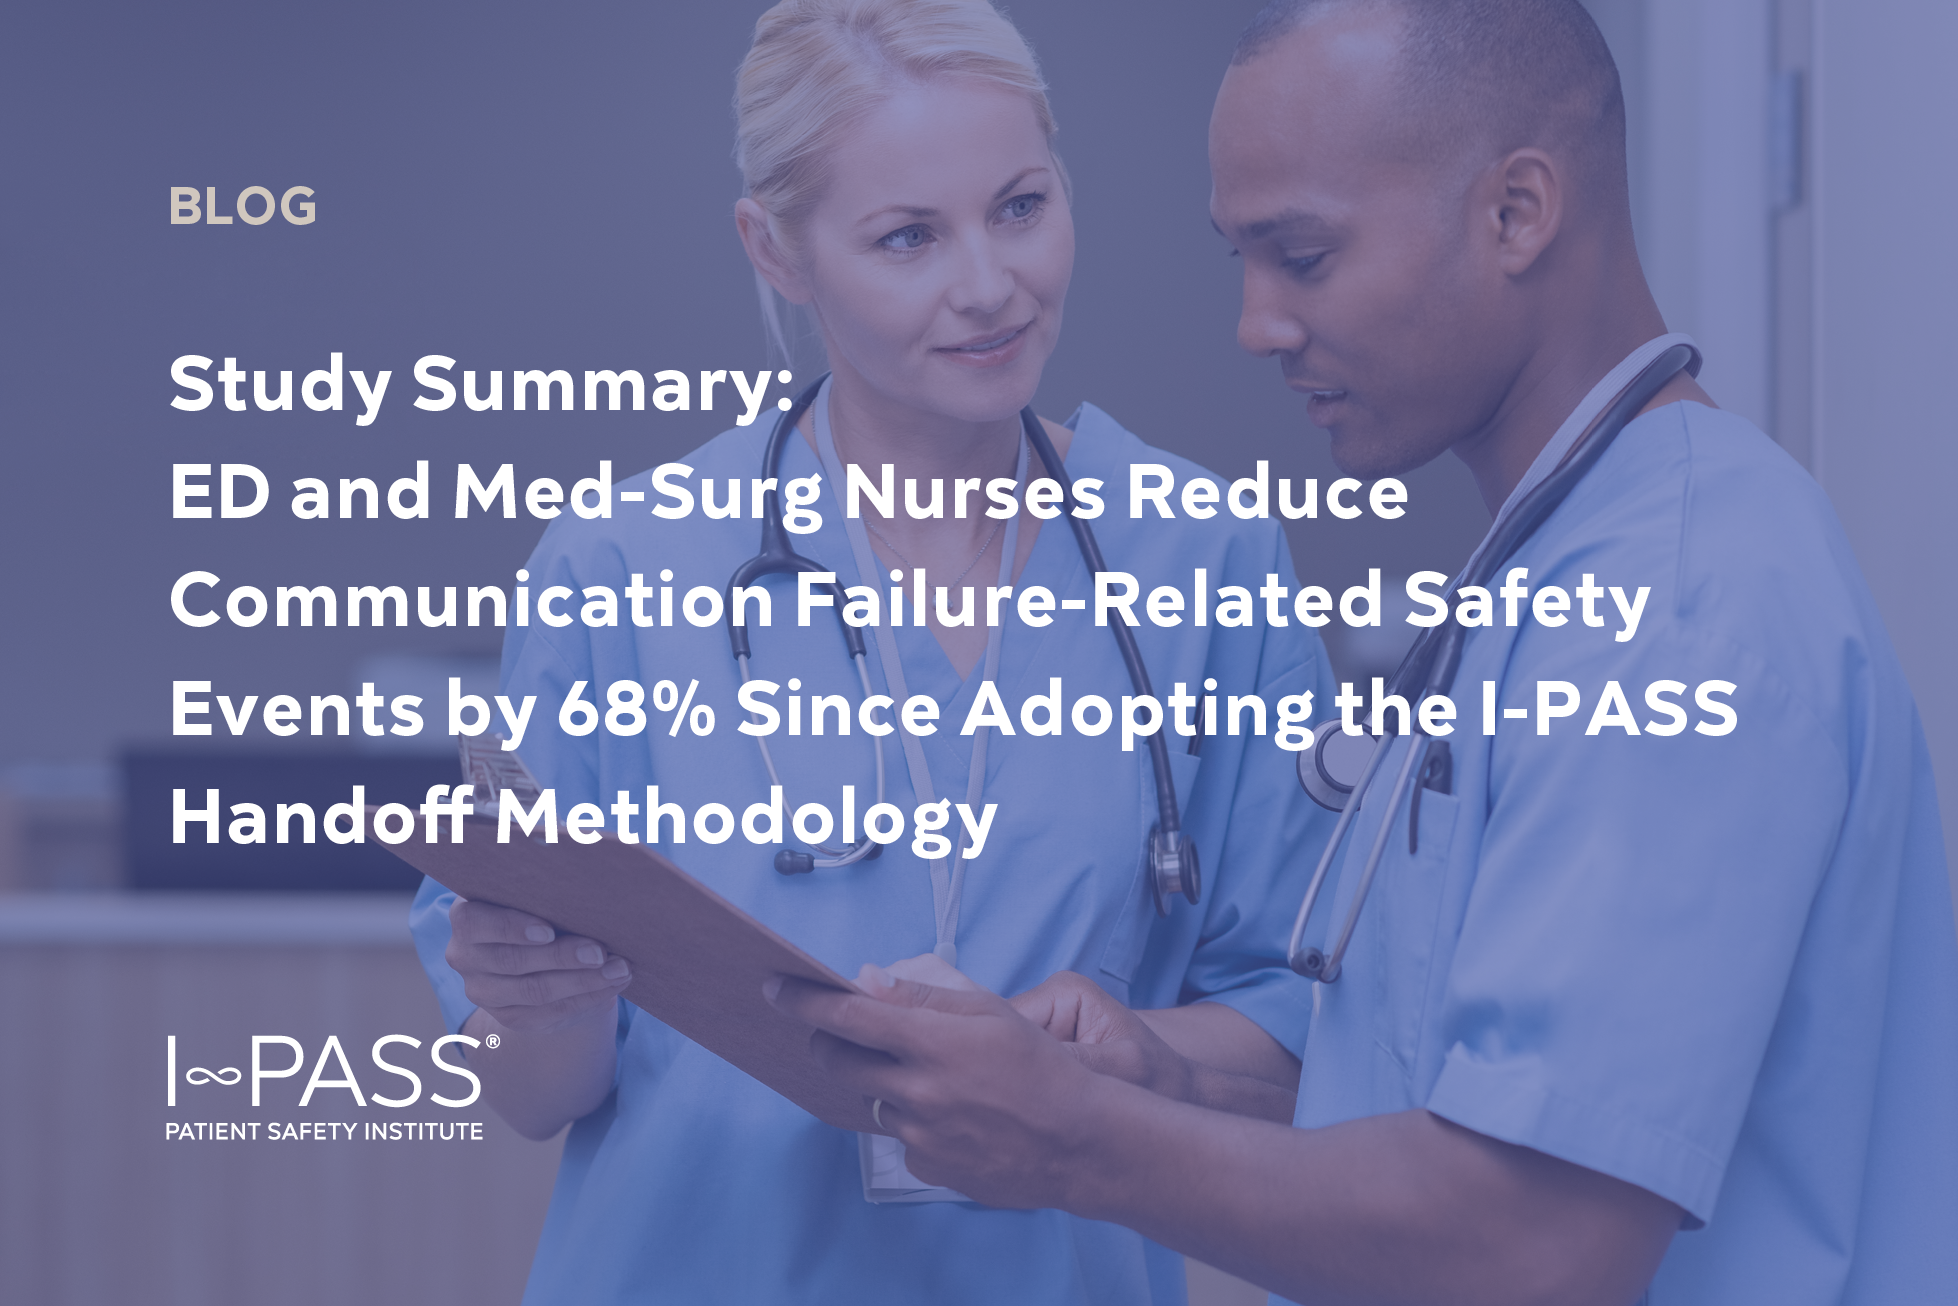 ED and Med-Surg Nurses Reduce Communication Failure-Related Safety Events by 68% Since Adopting the I-PASS Handoff Methodology